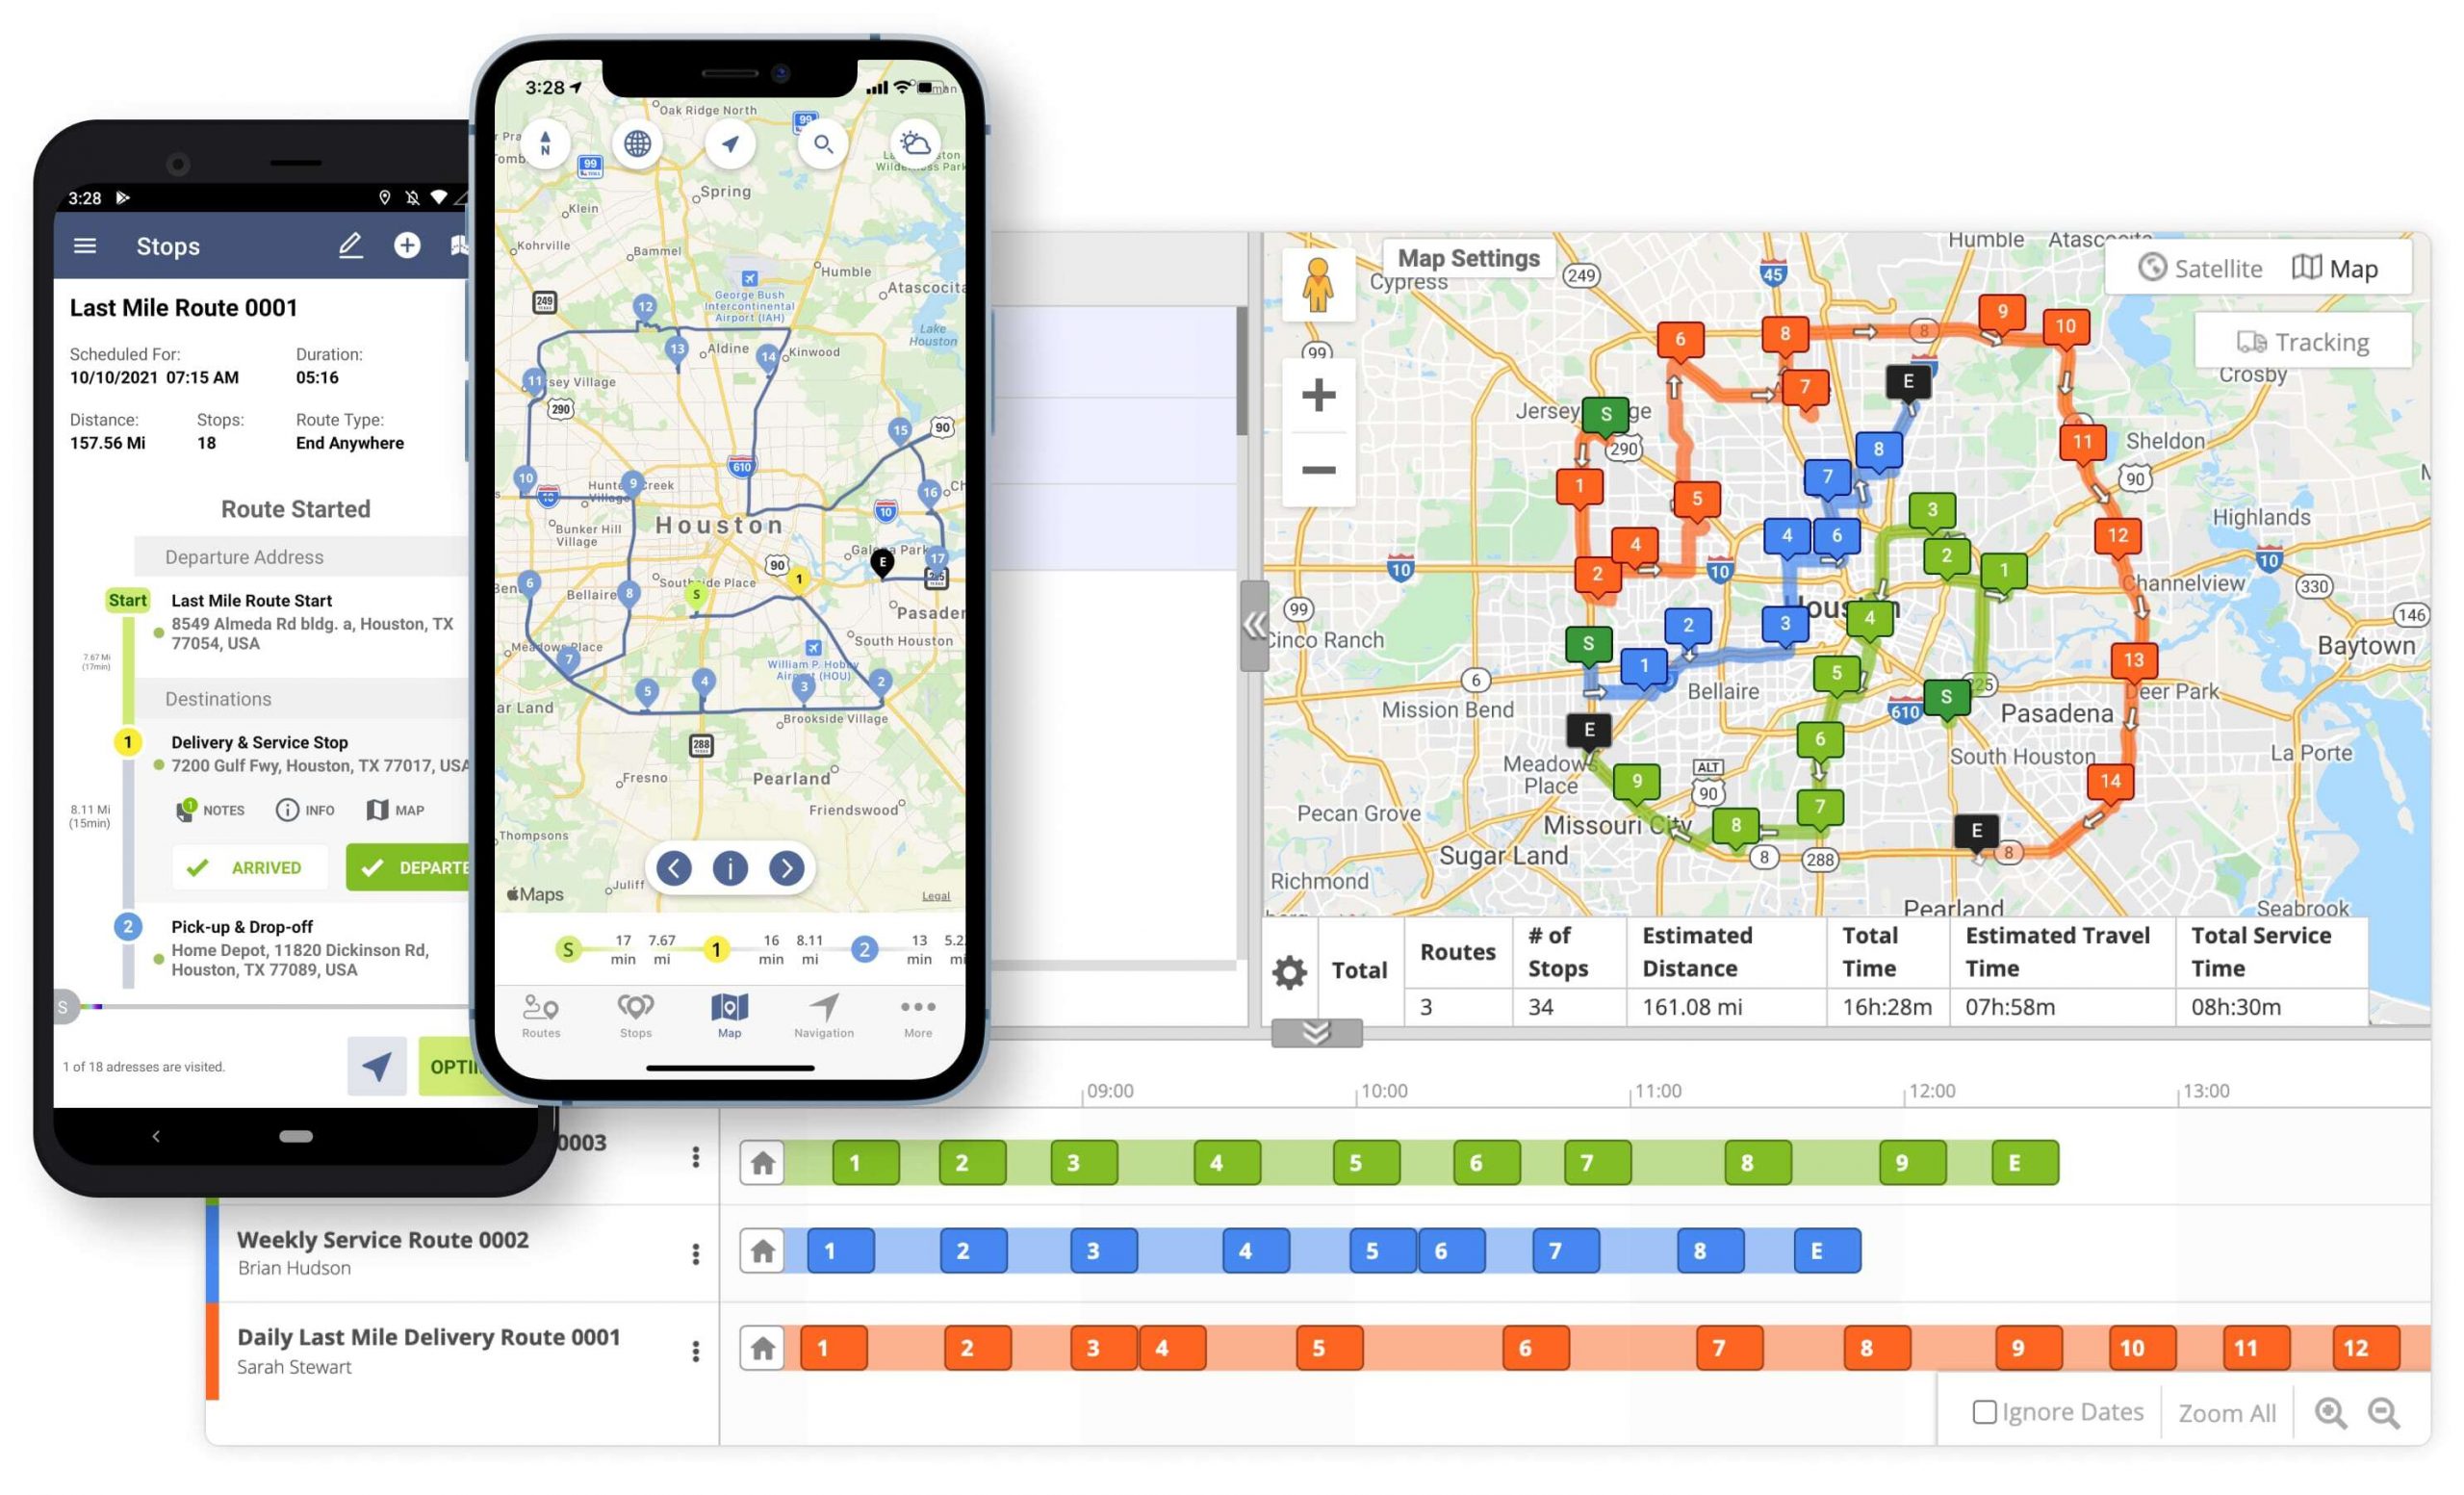 Route dispatch from Route4Me's route optimization software to delivery drivers' route planner apps.